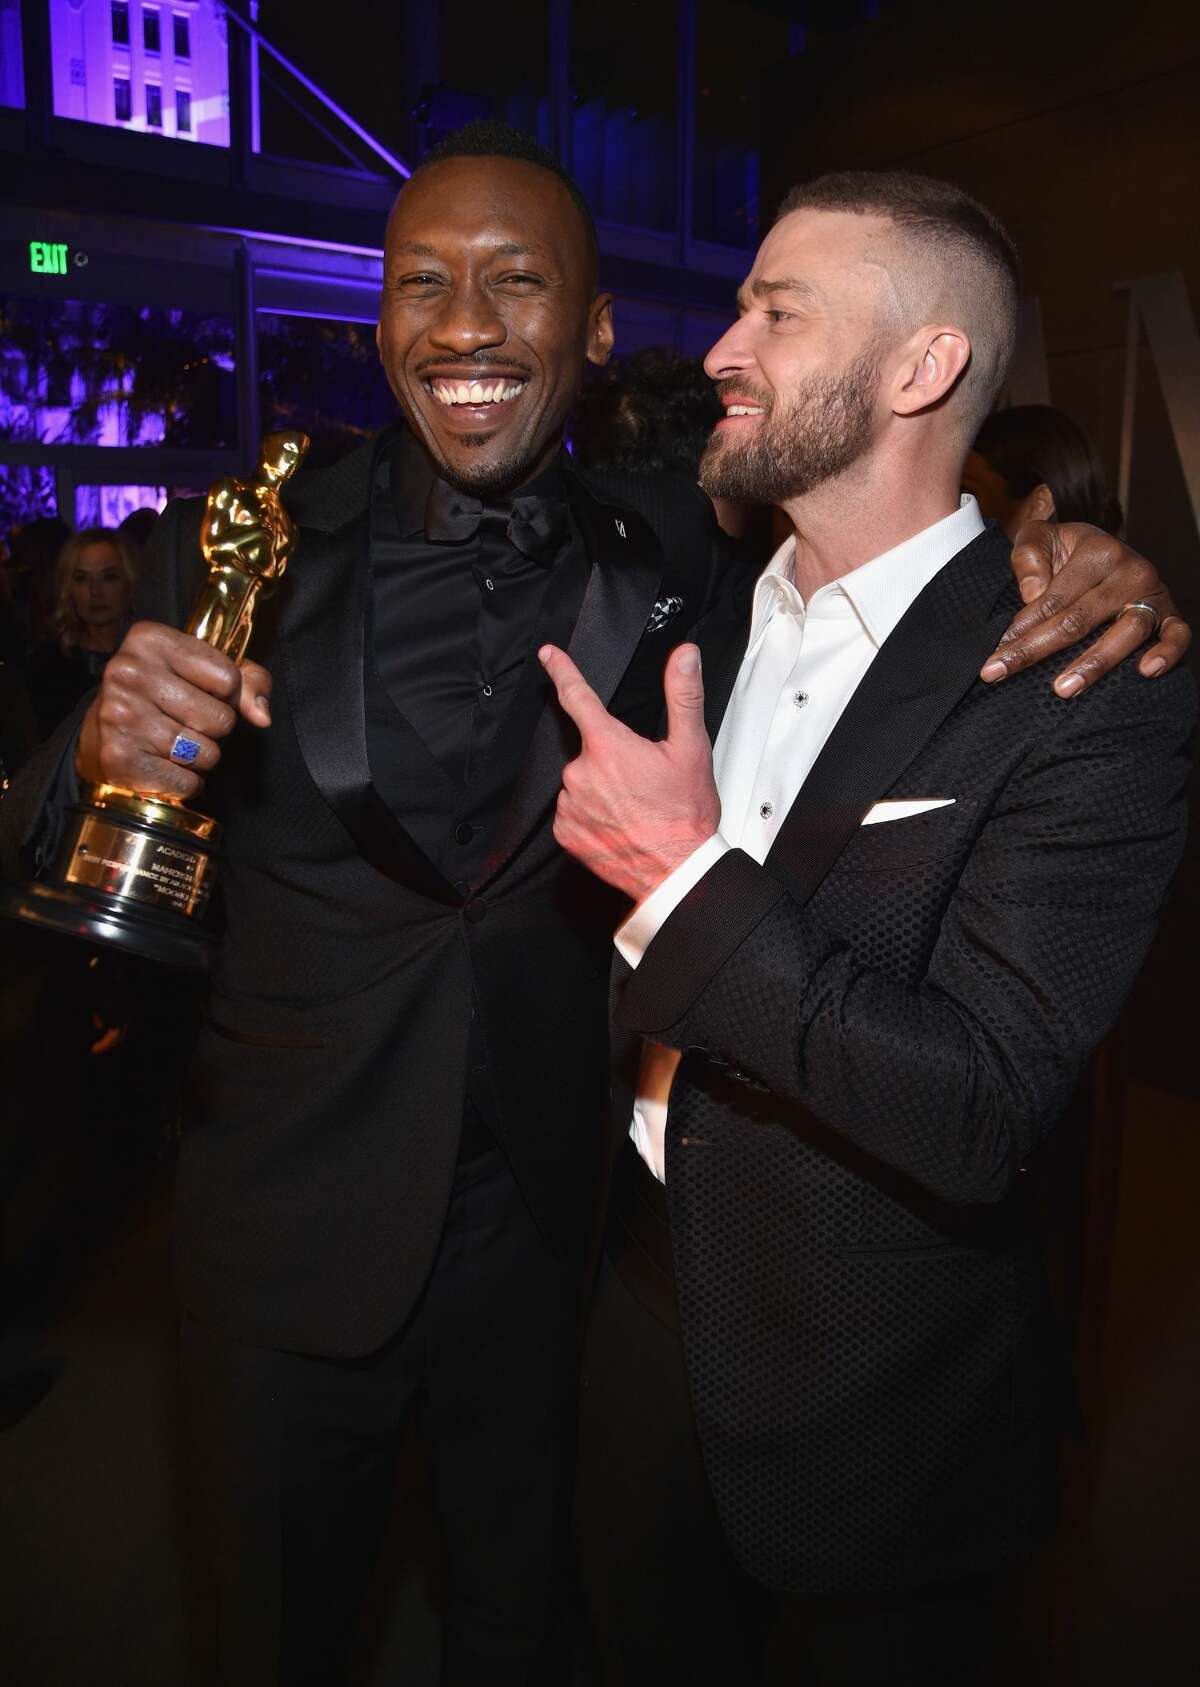 Actor Mahershala Ali (L) and singer/actor Justin Timberlake attend the 2017 Vanity Fair Oscar Party hosted by Graydon Carter at Wallis Annenberg Center for the Performing Arts on February 26, 2017 in Beverly Hills, California.